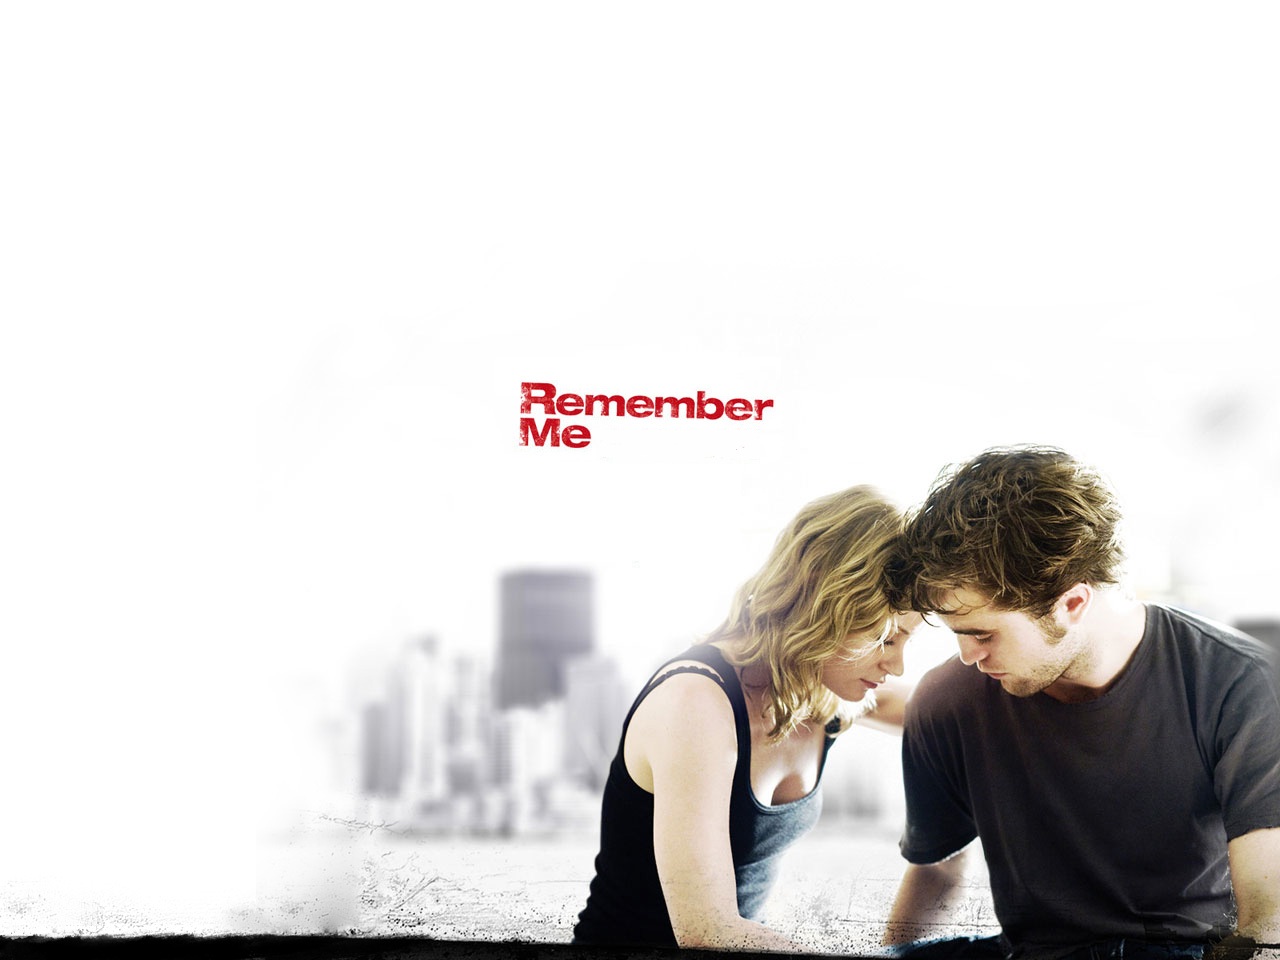 To my he remembered me. Remember me. Обои ремембер. Remember me фраза в жизни.